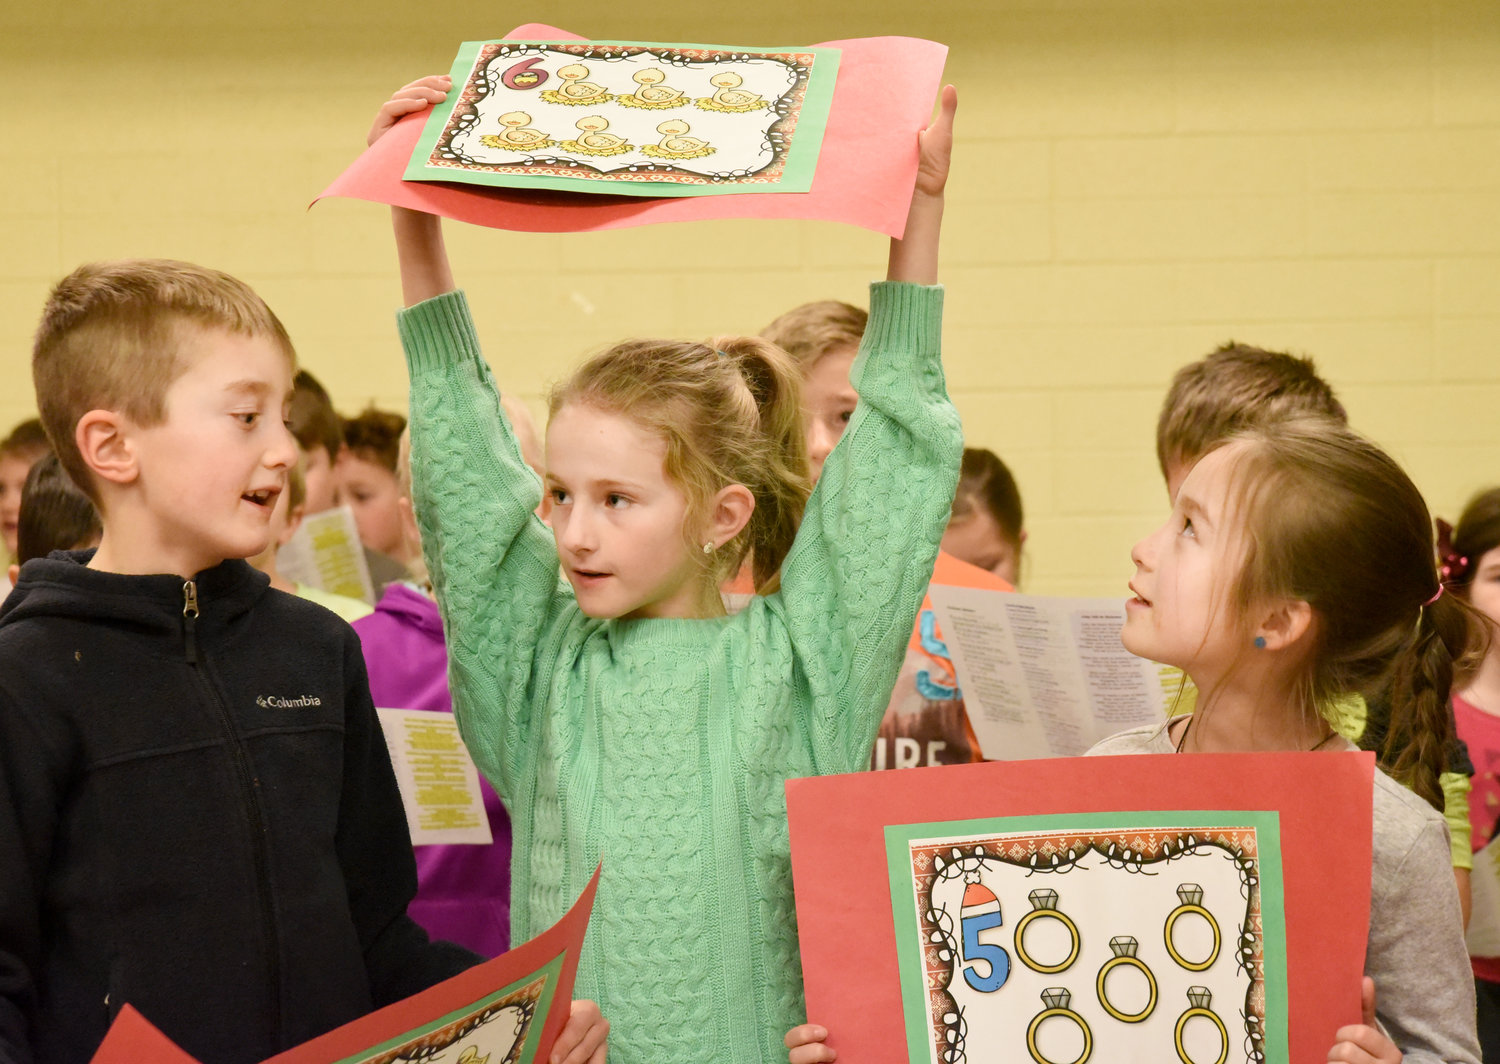 Kinsley Ginderich holds up a poster for six geese a laying providing musical accompaniment were Liam Frederick (left) and Sophia Patterson. The Mid-Prairie East second graders performed Christmas songs for the Rotary Club of Kalona on Dec. 17.